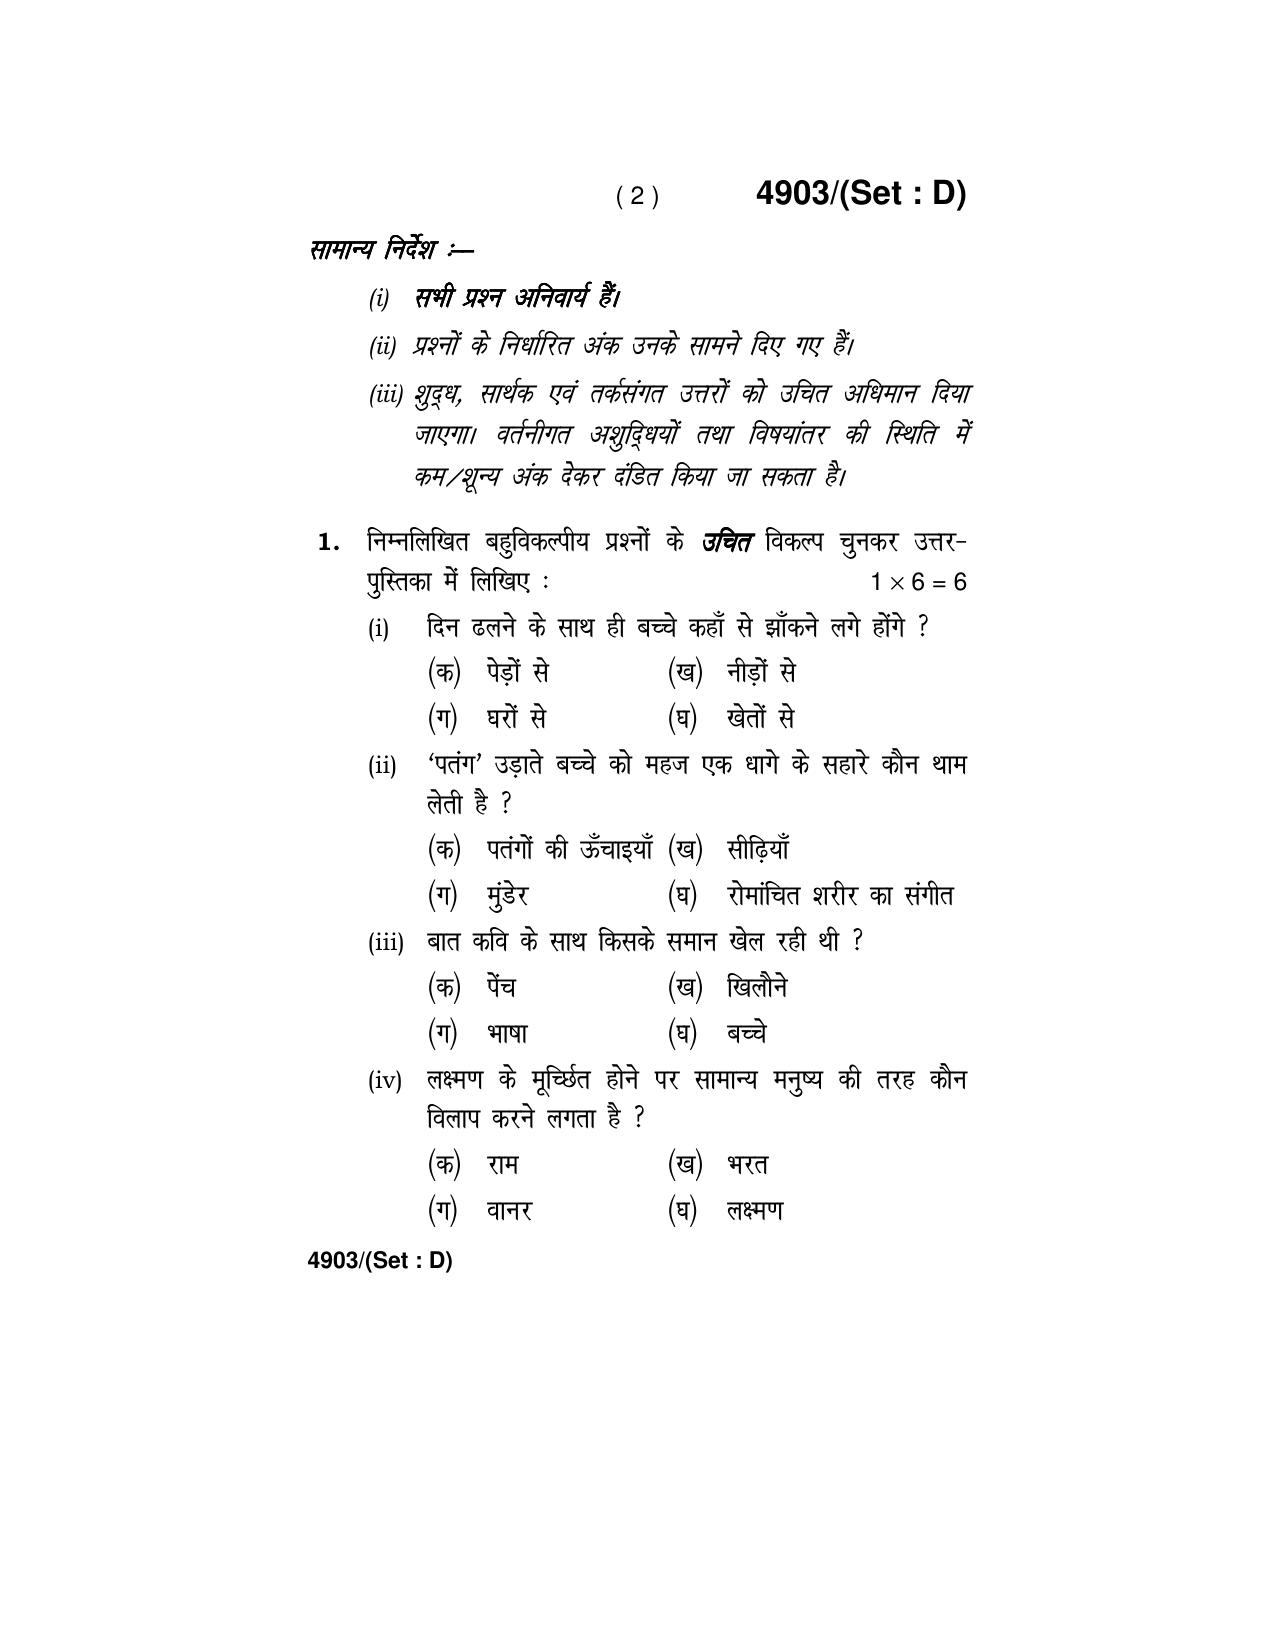 Haryana Board HBSE Class 12 Hindi Core 2020 Question Paper - Page 26